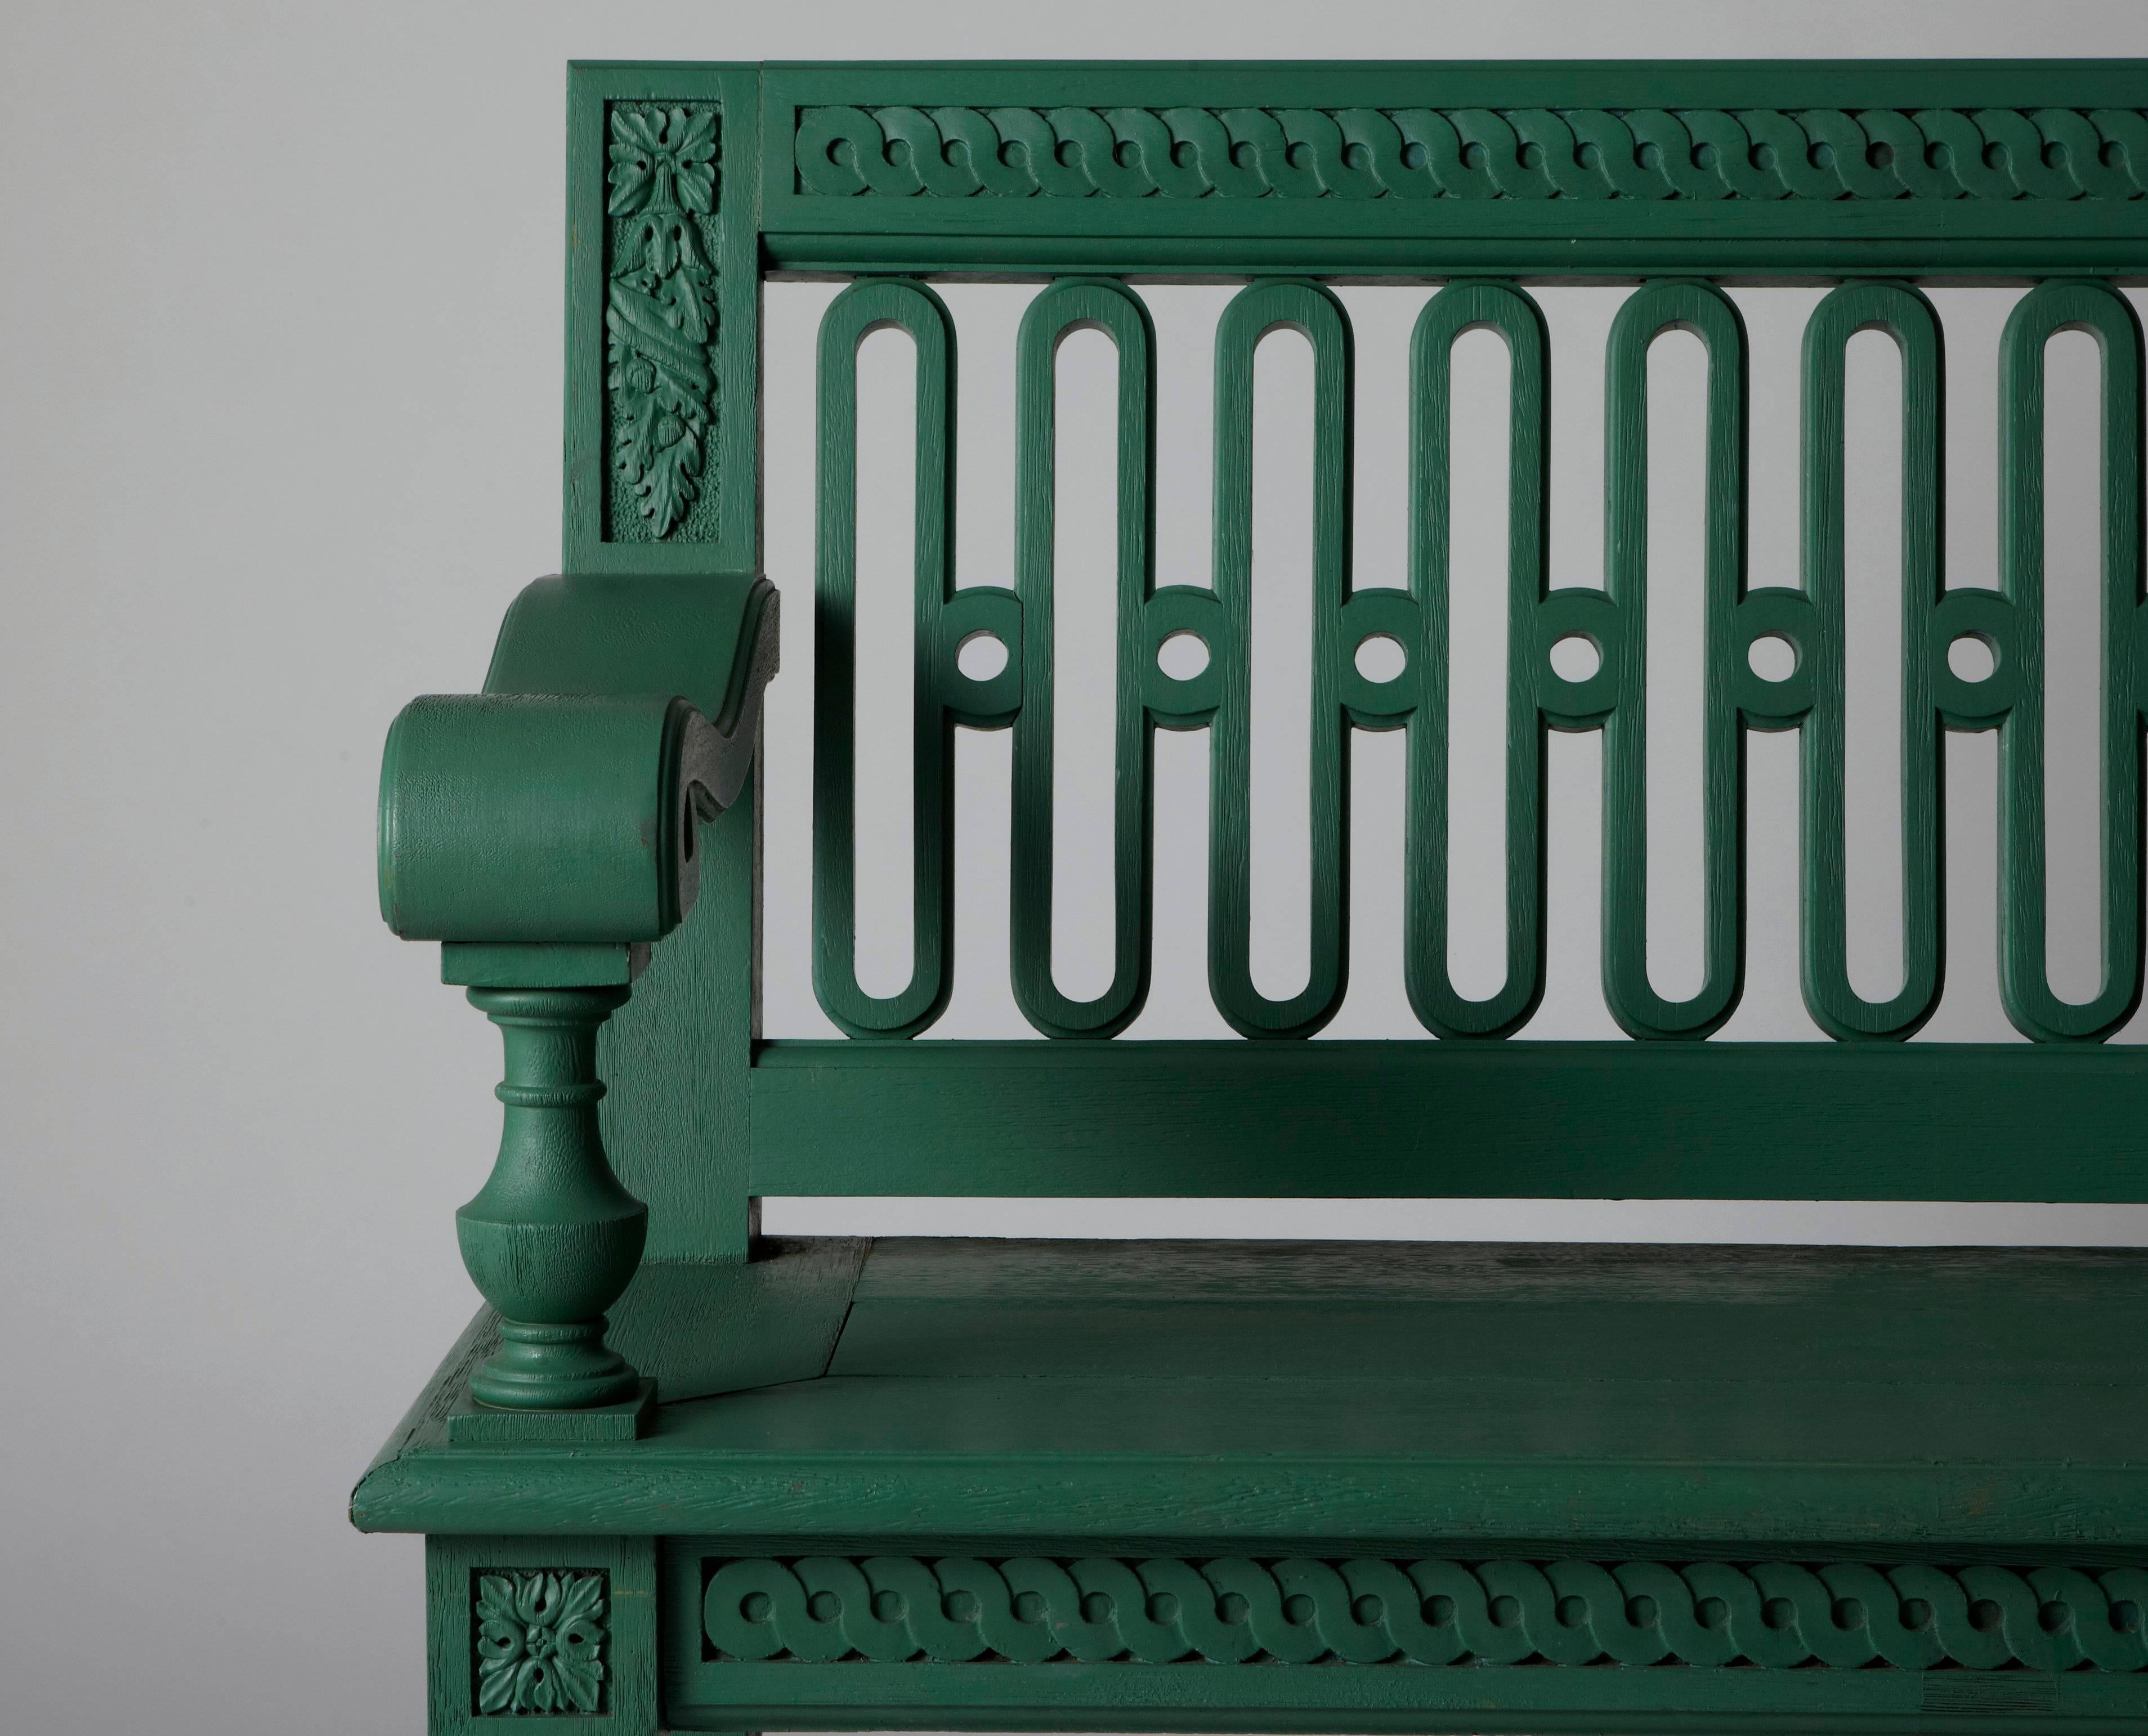 The benches are designed by Pierre-André Lablaude, according to the original prints from the 17th century. Jardins du Roi Soleil produces them under an exclusive licence contract with the Château de Versailles. The benches are traditionally made of